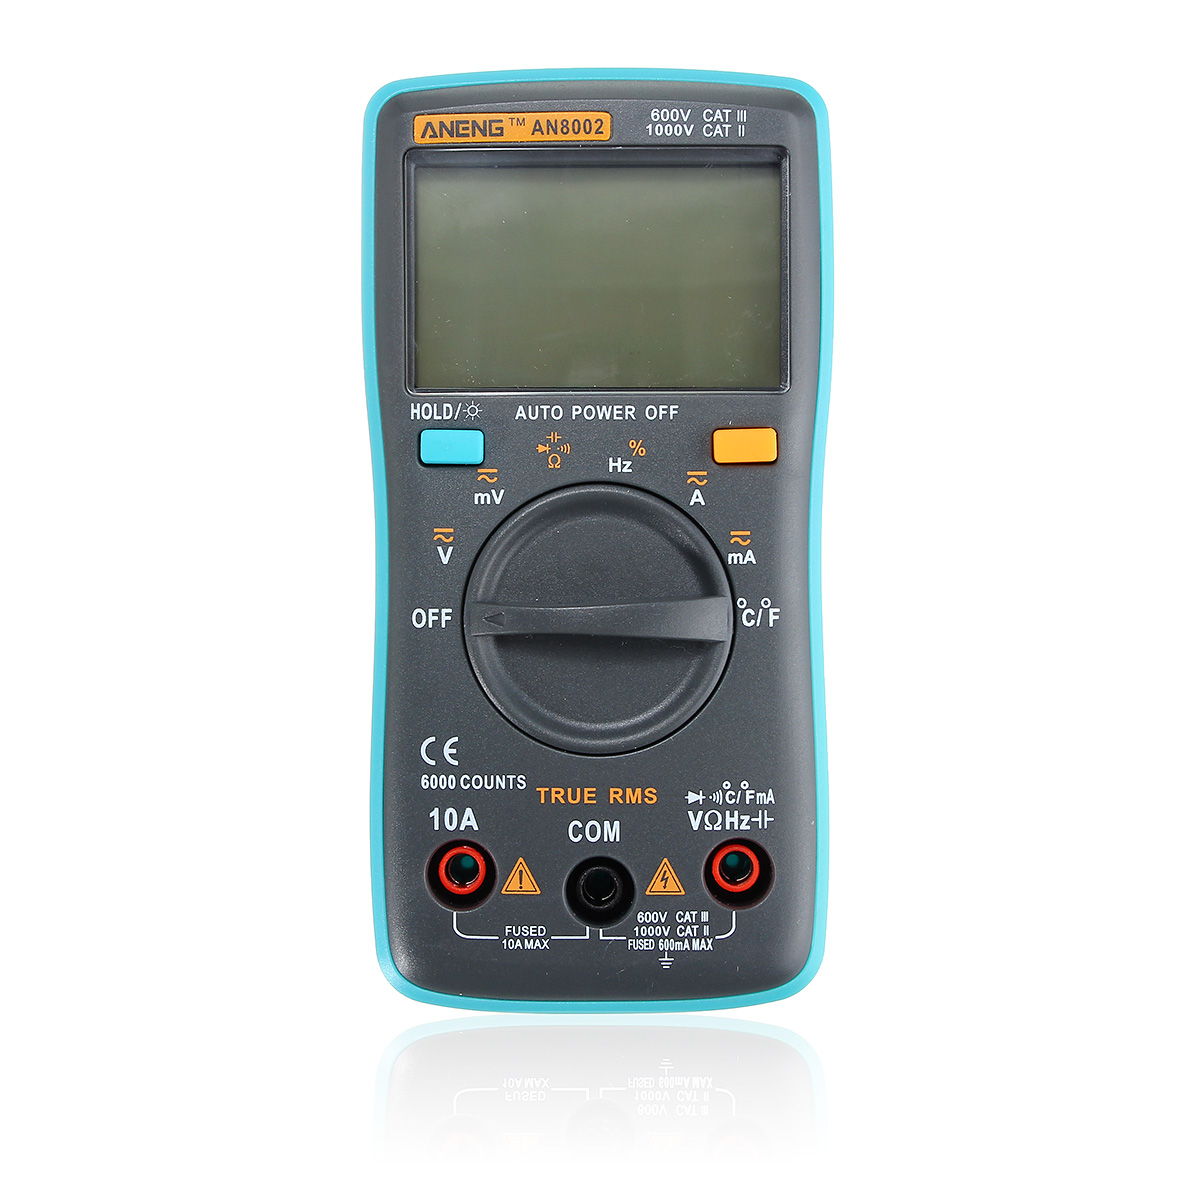 ANENG AN8002 Digital True RMS 6000 Counts Multimeter AC/DC Current Voltage Frequency Resistance Temperature Tester ℃/℉ 146